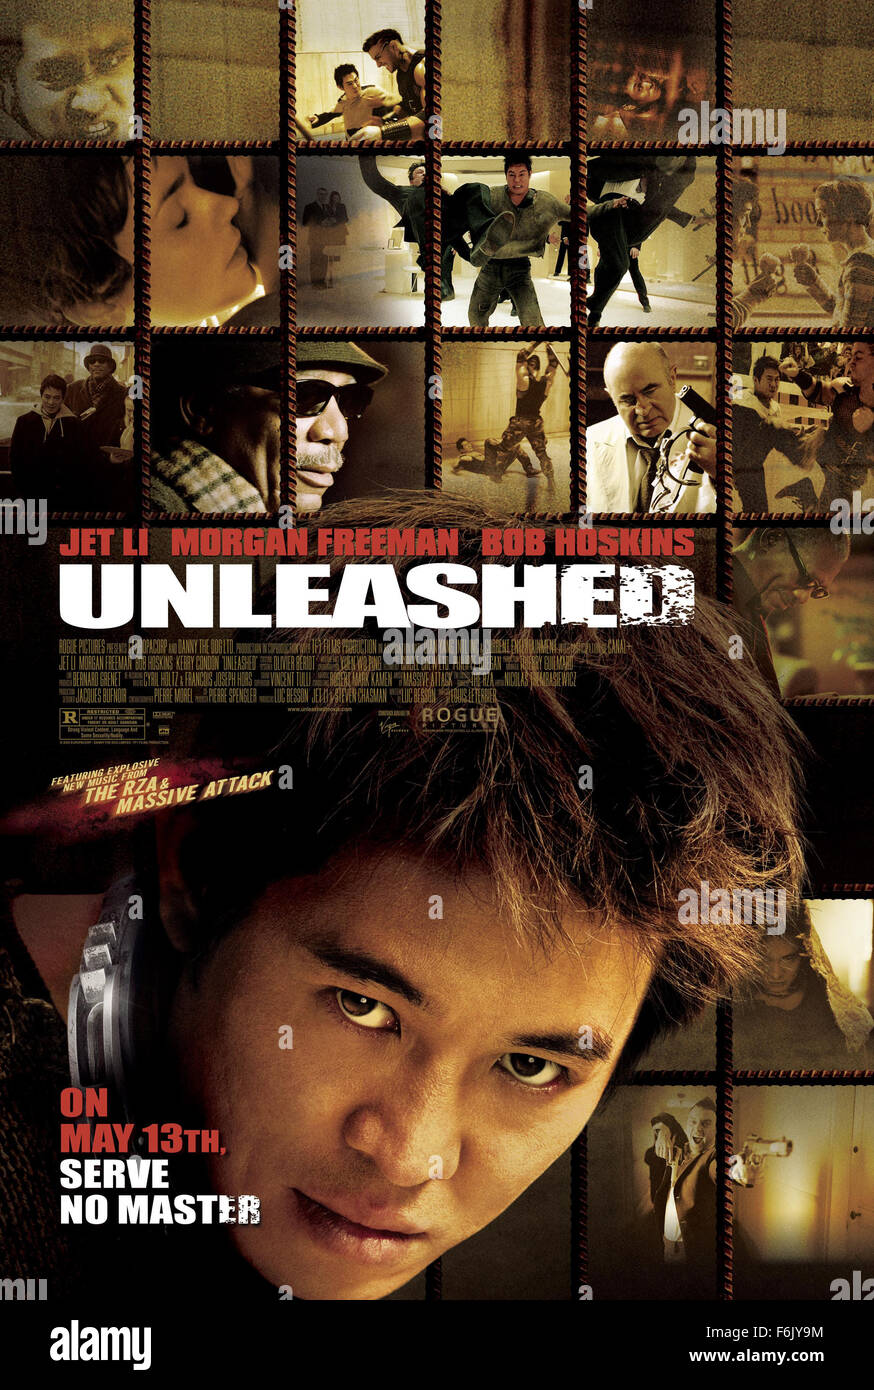 RELEASE DATE: May 13, 2005   MOVIE TITLE: Unleashed   STUDIO: Europa Corp   PLOT: A man raised into behaving like a dog, escapes from his captor to start a new life, who seeks to reclaim him because of his unnatural martial arts skills that are triggered when unleashed. Directed by Louis Leterrier.   PICTURED: Movie poster with JET LI as Danny, MORGAN FREEMAN as Sam and BOB HOSKINS as Bart.   (Credit Image: c Europa Corp./Entertainment Pictures) Stock Photo